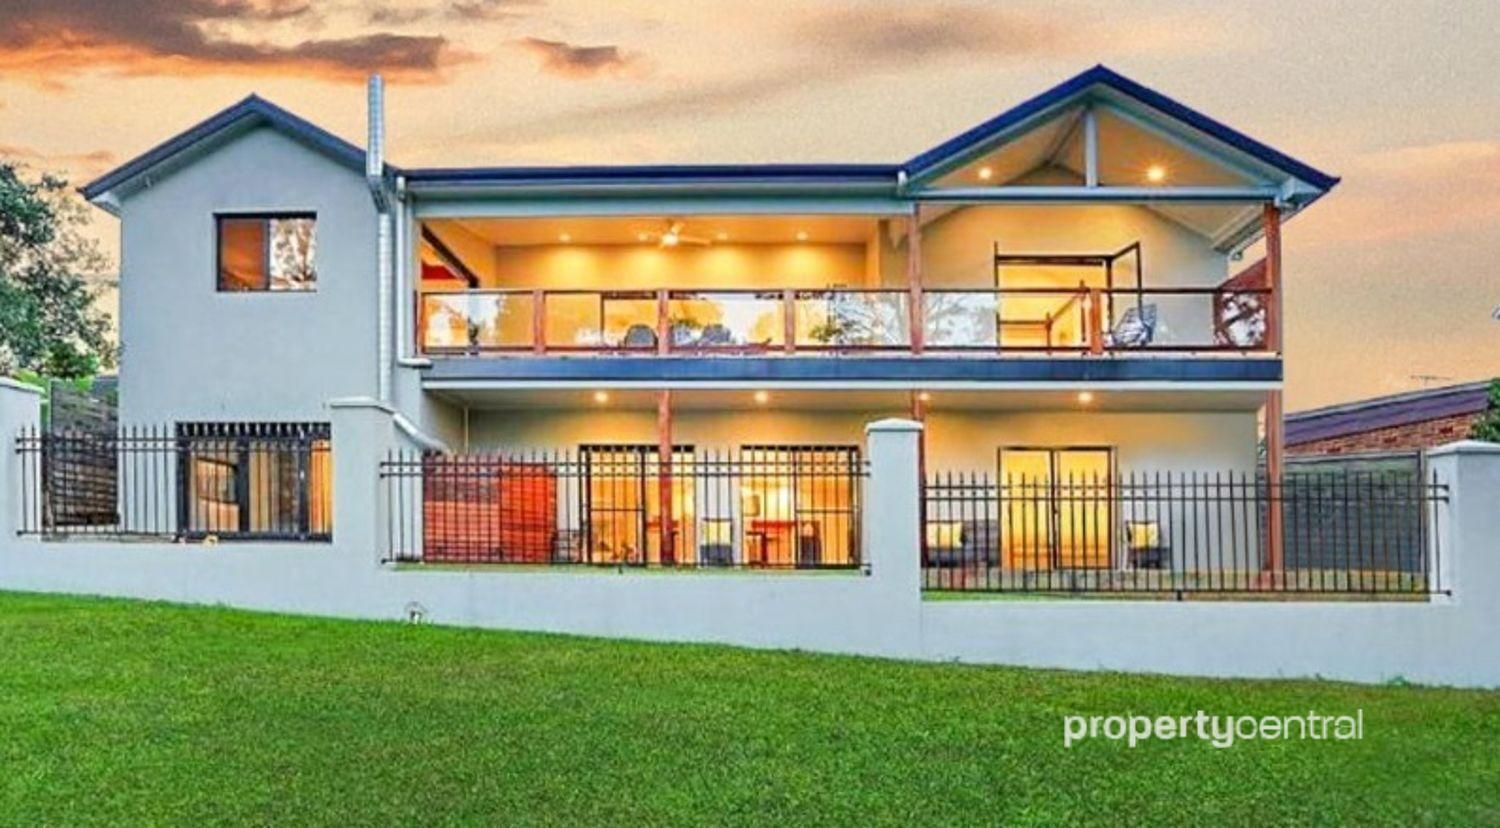 5 bedrooms House in 10 Currawong Crescent LEONAY NSW, 2750